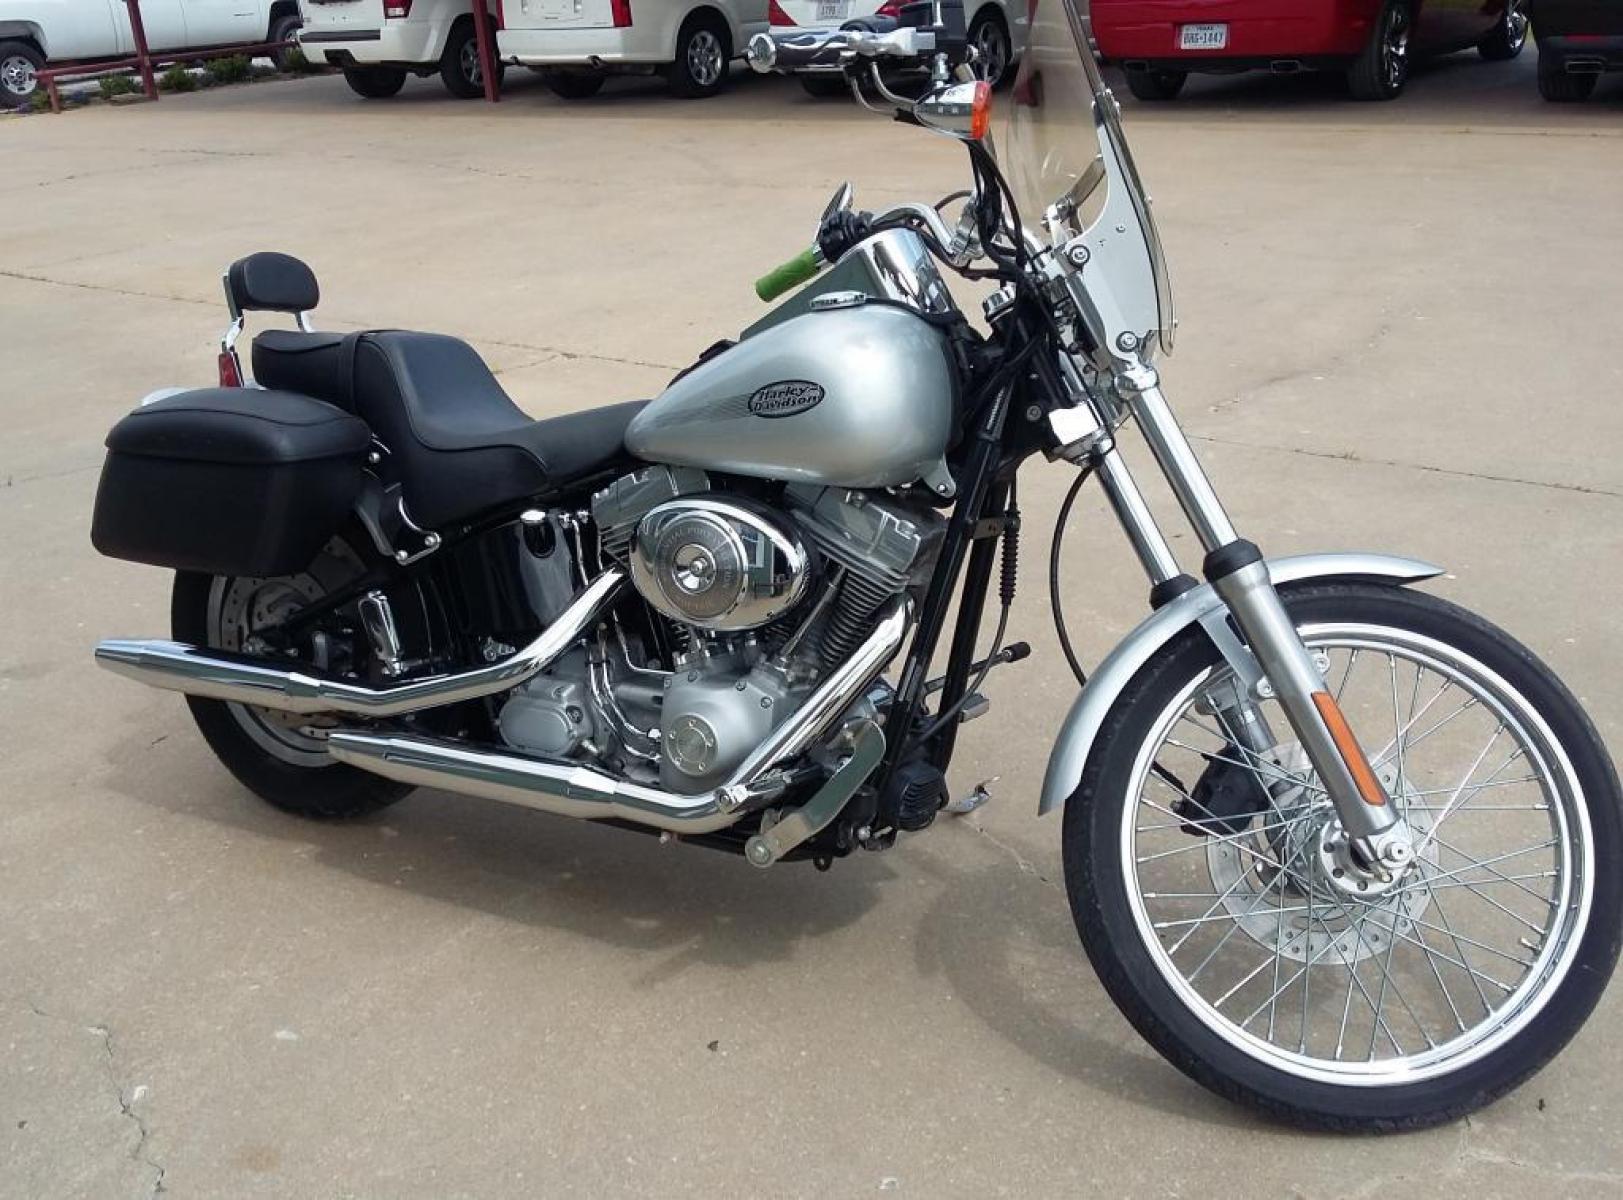 2004 Silver Harley-Davidson FXSTI - (1HD1BVB164Y) with an 1450CC engine, Standard transmission, located at 17760 HWY 62, MORRIS, 74445, 35.609104, -95.877060 - 2004 HARLEY-DAVIDSON FXSTI SOFTAIL STANDARD 1450CC FEATURES HARLEY SADDLEBAGS, AN ACCESSORY BAG ON THE TANK, SILVER POWDER-COATED ENGINE AND COVERS, HARDTAIL STYLING WITH HIDDEN HORIZONTAL REAR SHOCKS, BLACK HORSESHOE OIL TANK, BOBTAIL FENDER, RAKED FRONT FORKS. ALWAYS GARAGE KEPT!! IT'S IN EXCELLE - Photo #1